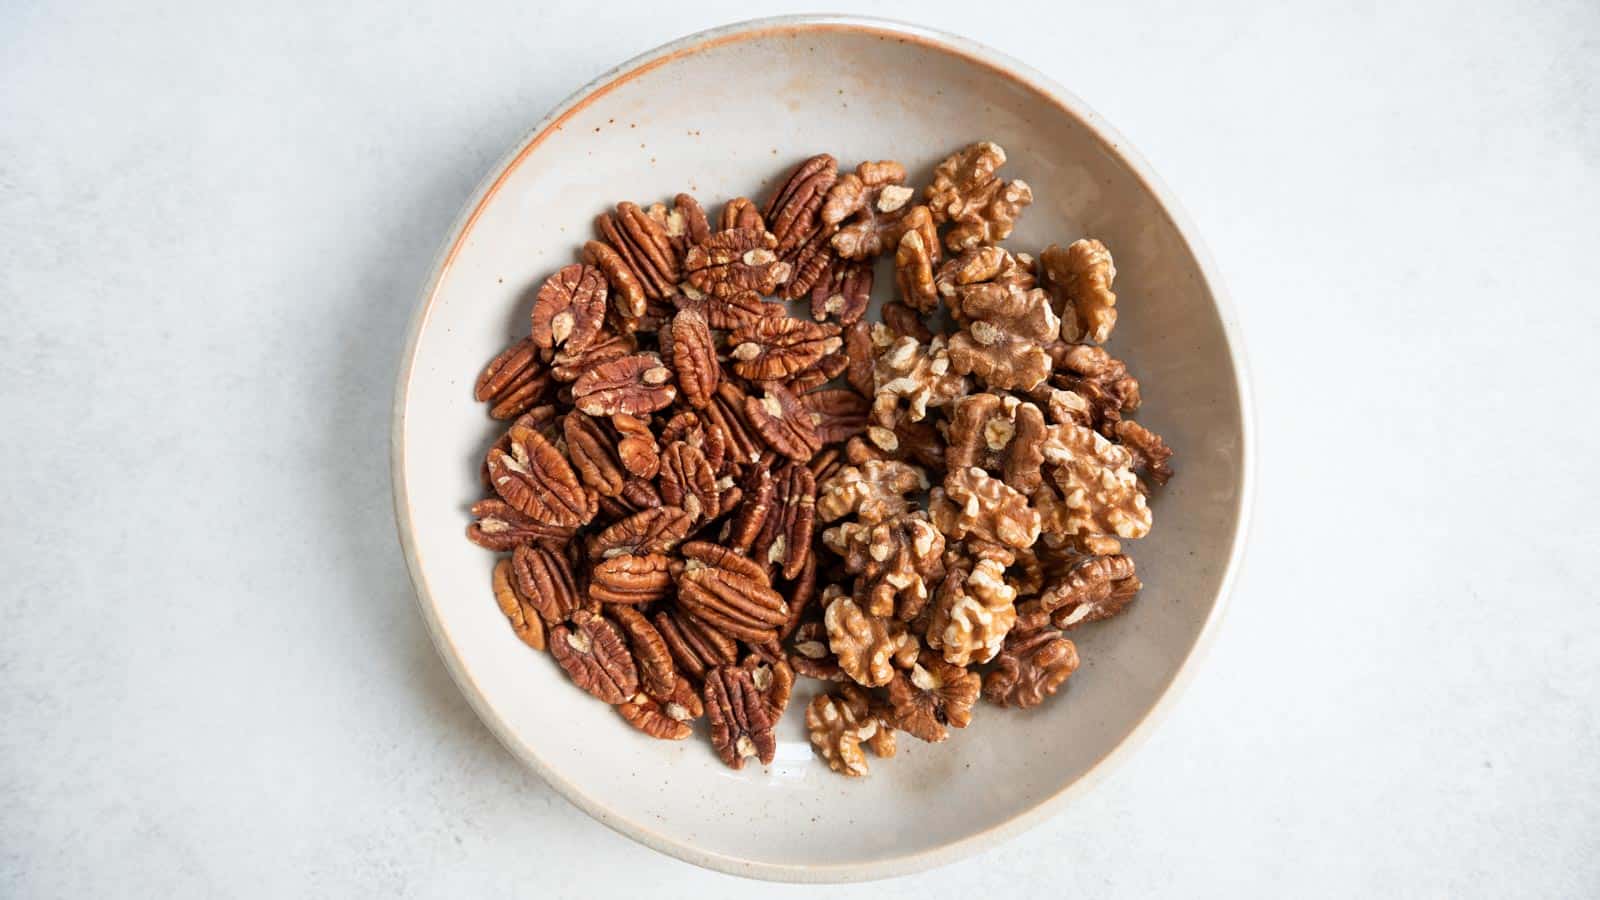 Roasted pecans and walnuts